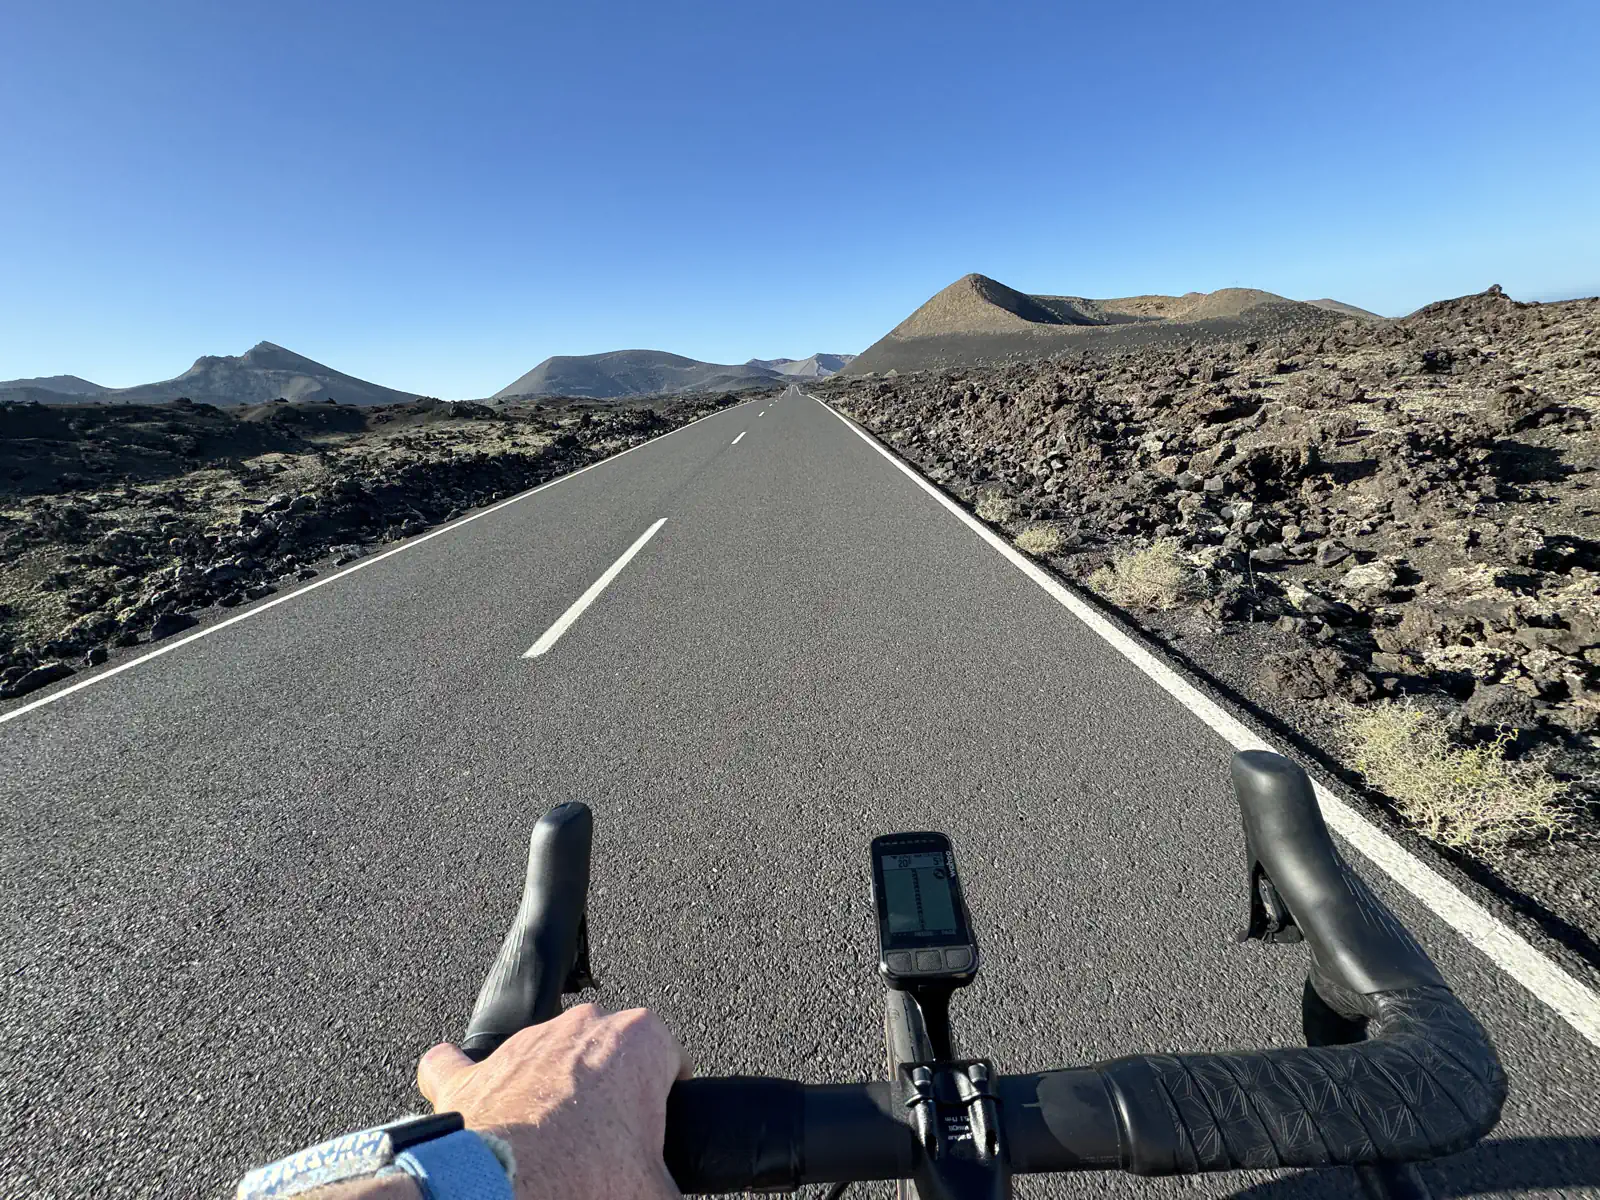 Cyclist's perspective on a road surrounded by volcanic terrain under a clear sky.